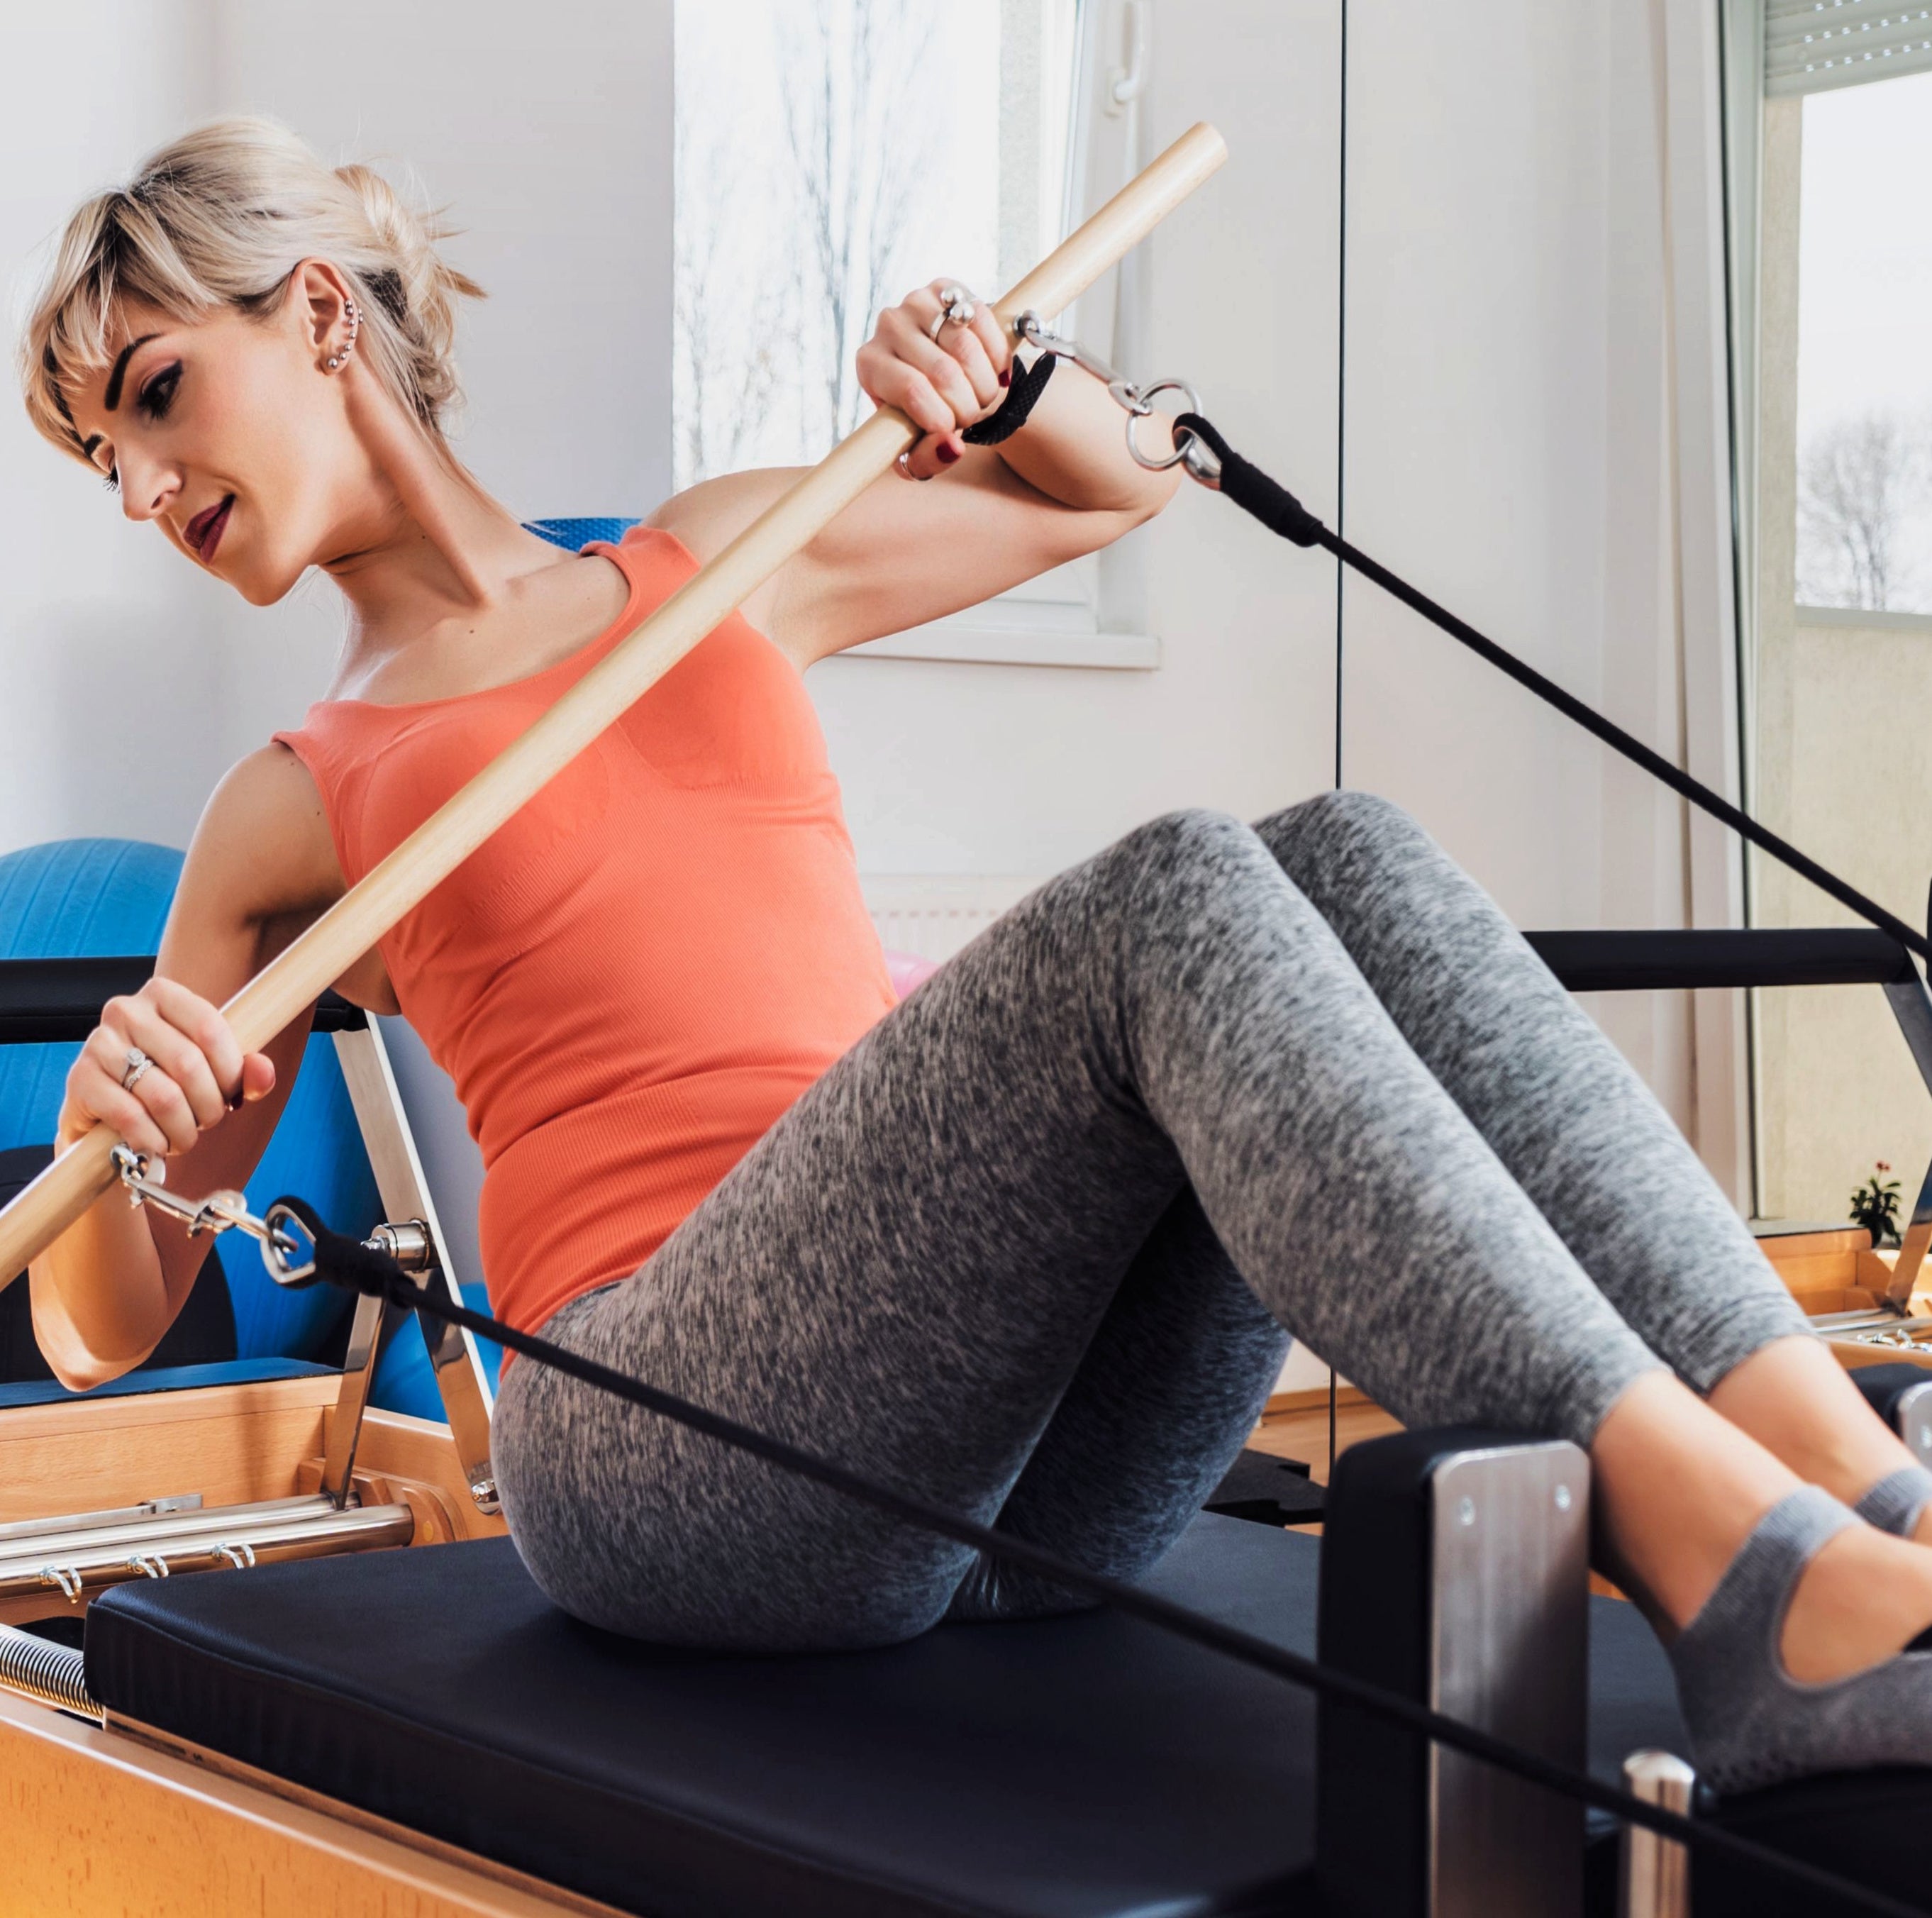 What to Wear to Pilates: Outfit Ideas for Men & Women